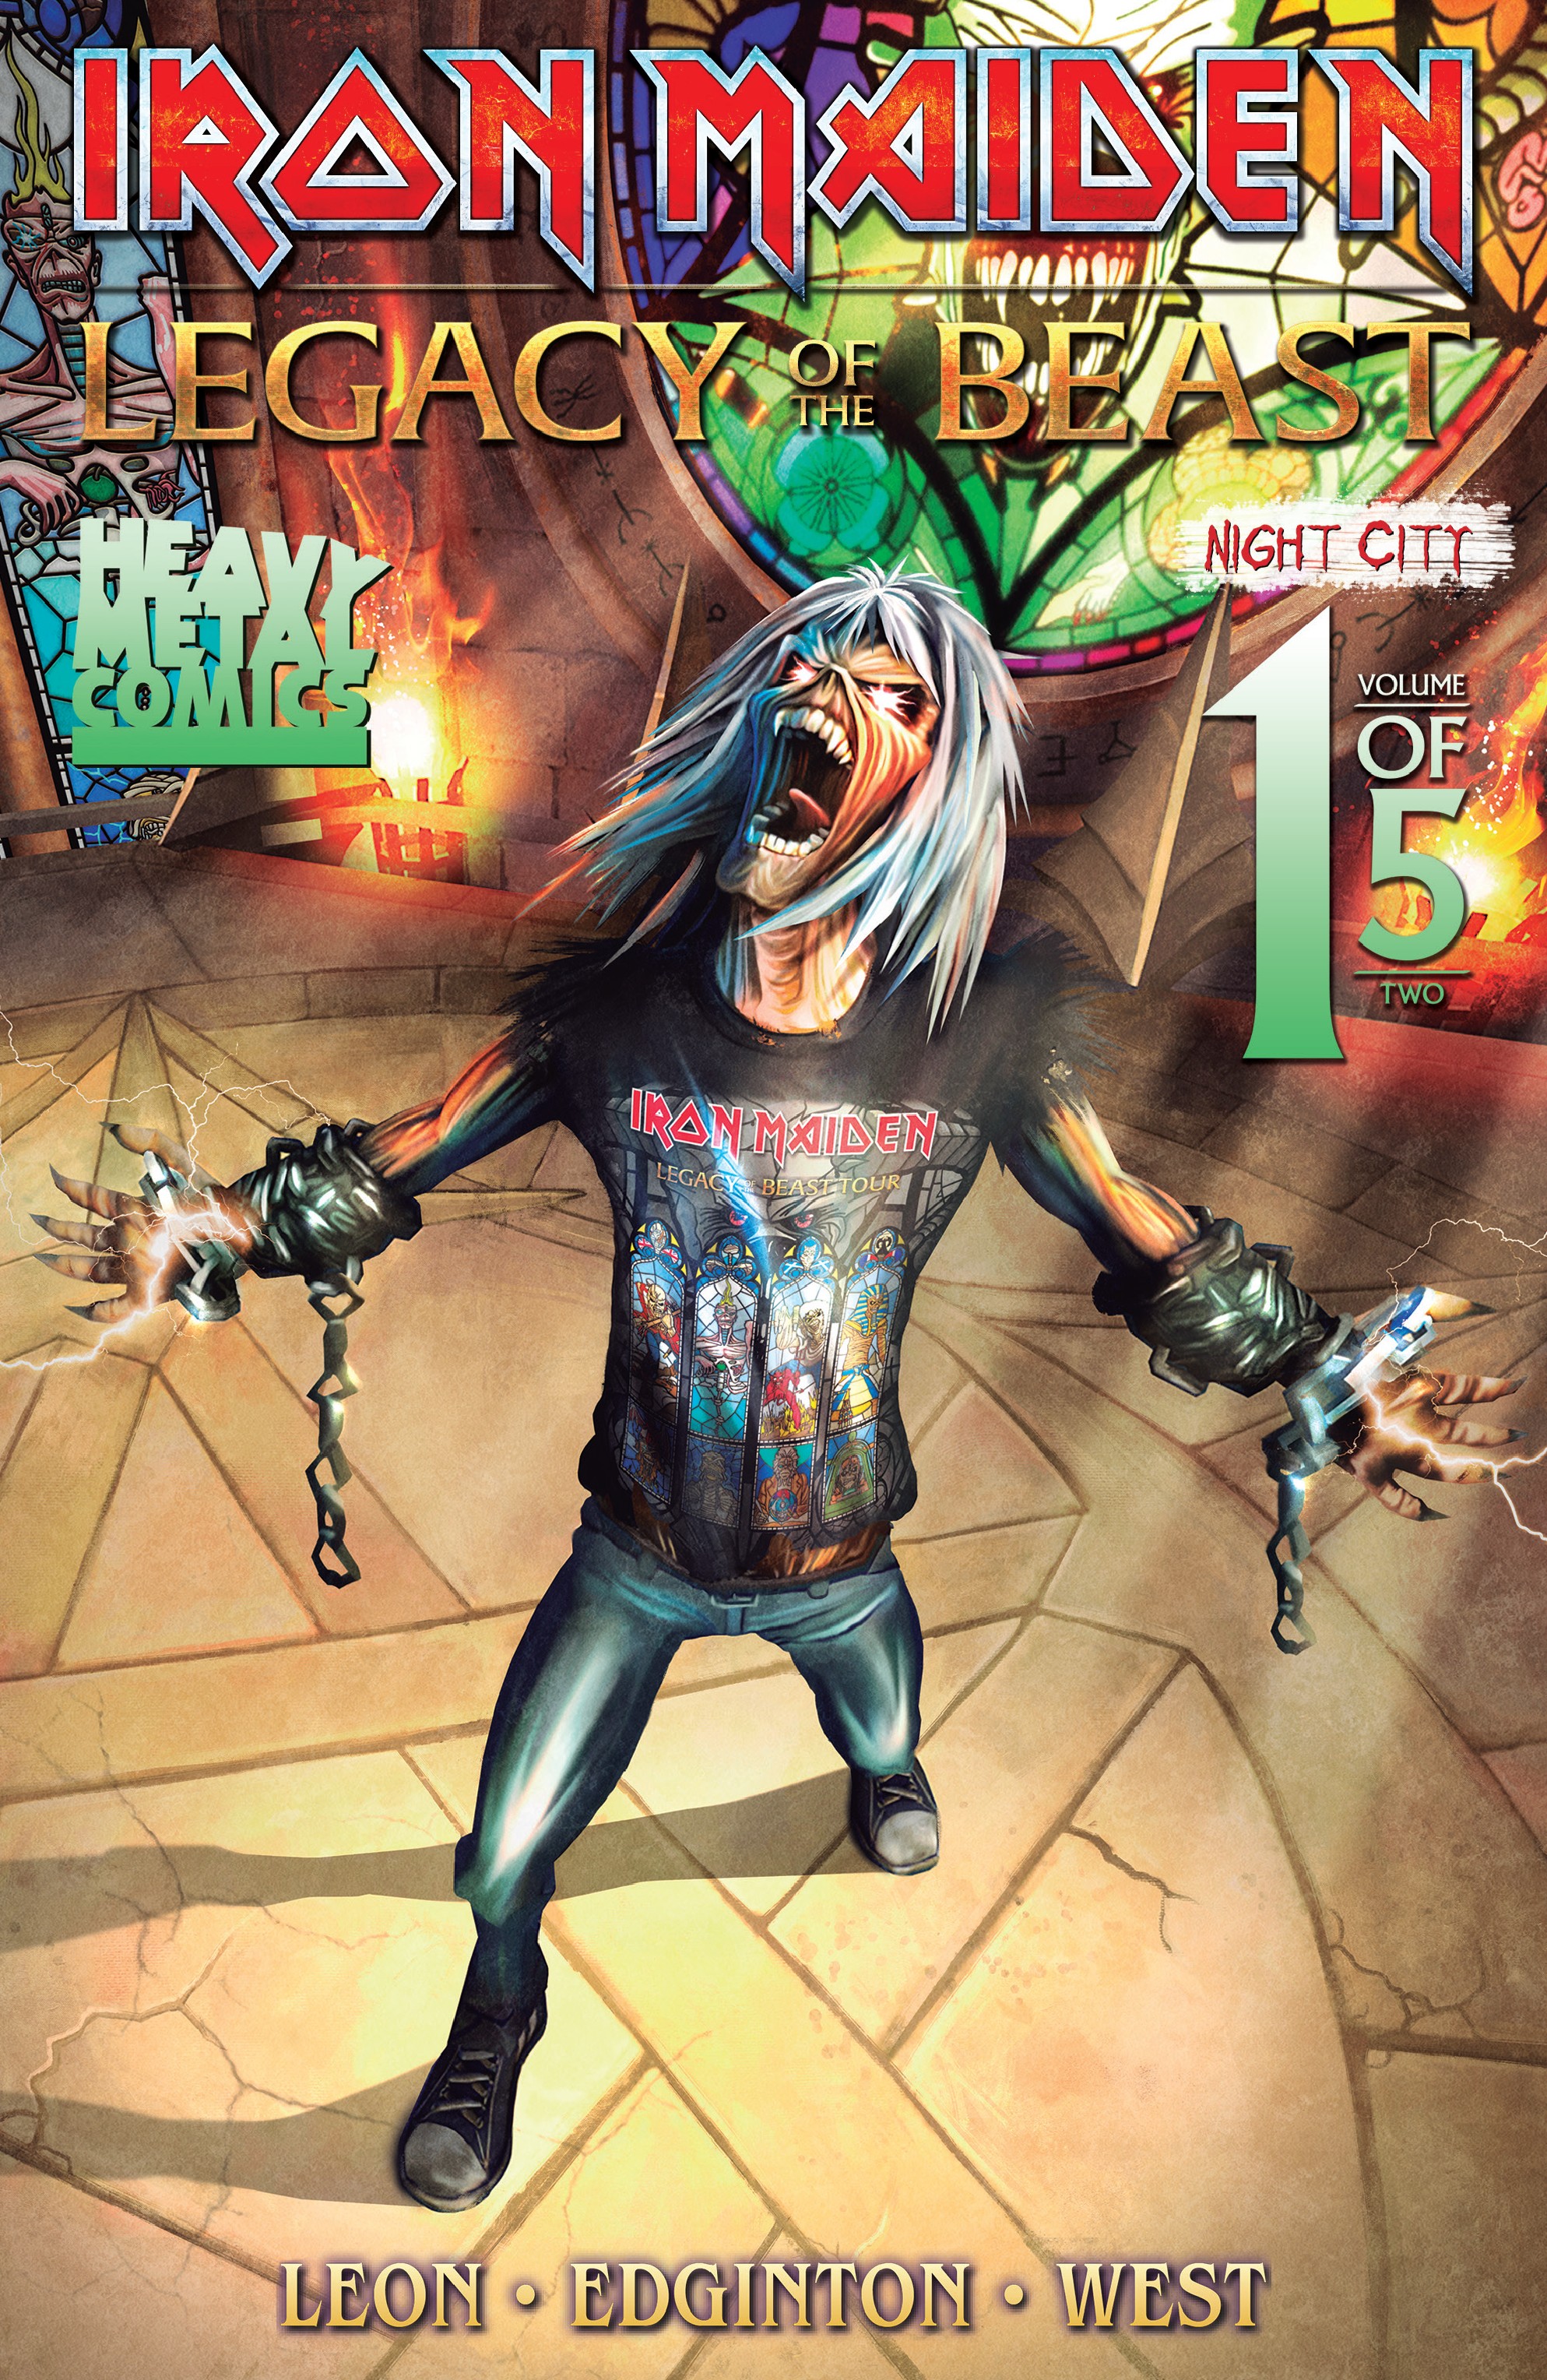 Read online Iron Maiden: Legacy of the Beast - Night City comic -  Issue #1 - 1